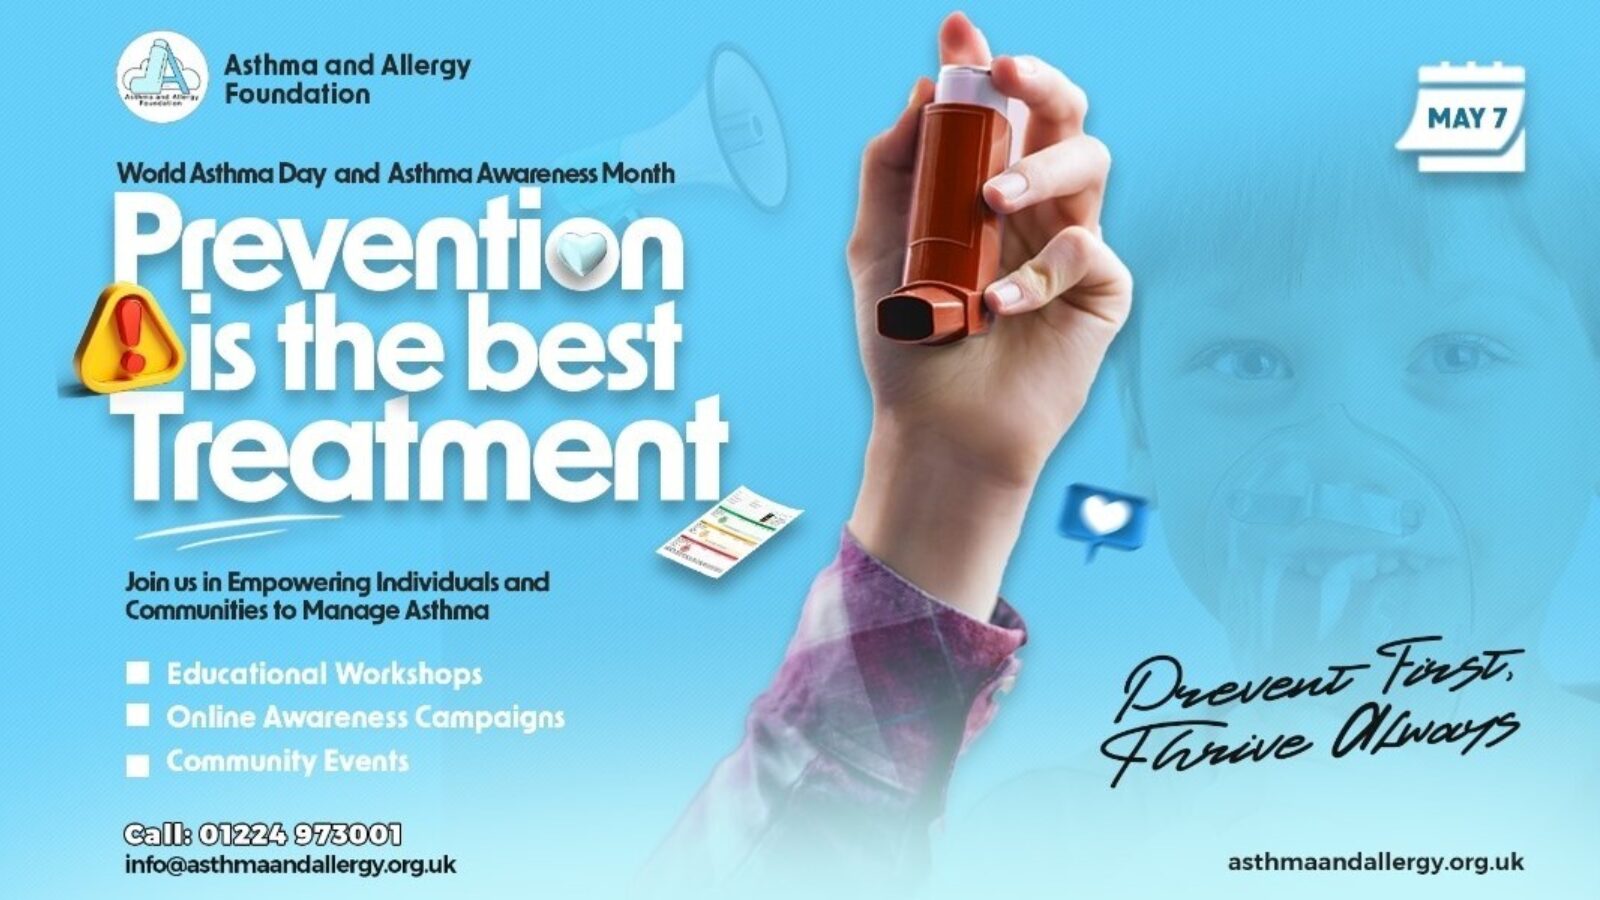 'Prevention is the Best Treatment': Promoting Asthma Awareness Month and World Asthma Day